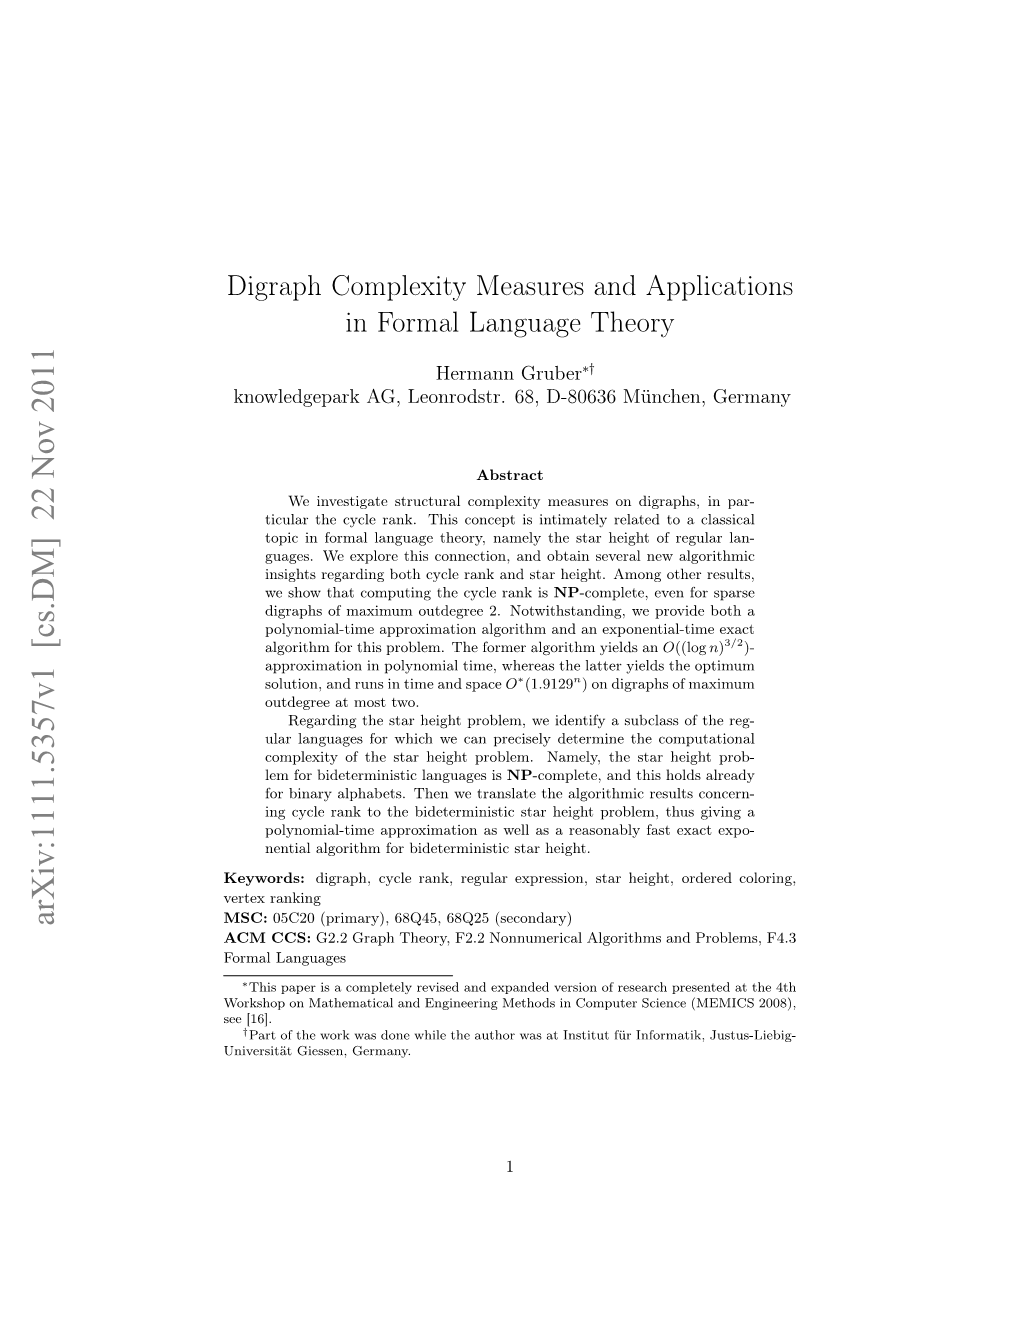 Digraph Complexity Measures and Applications in Formal Language Theory